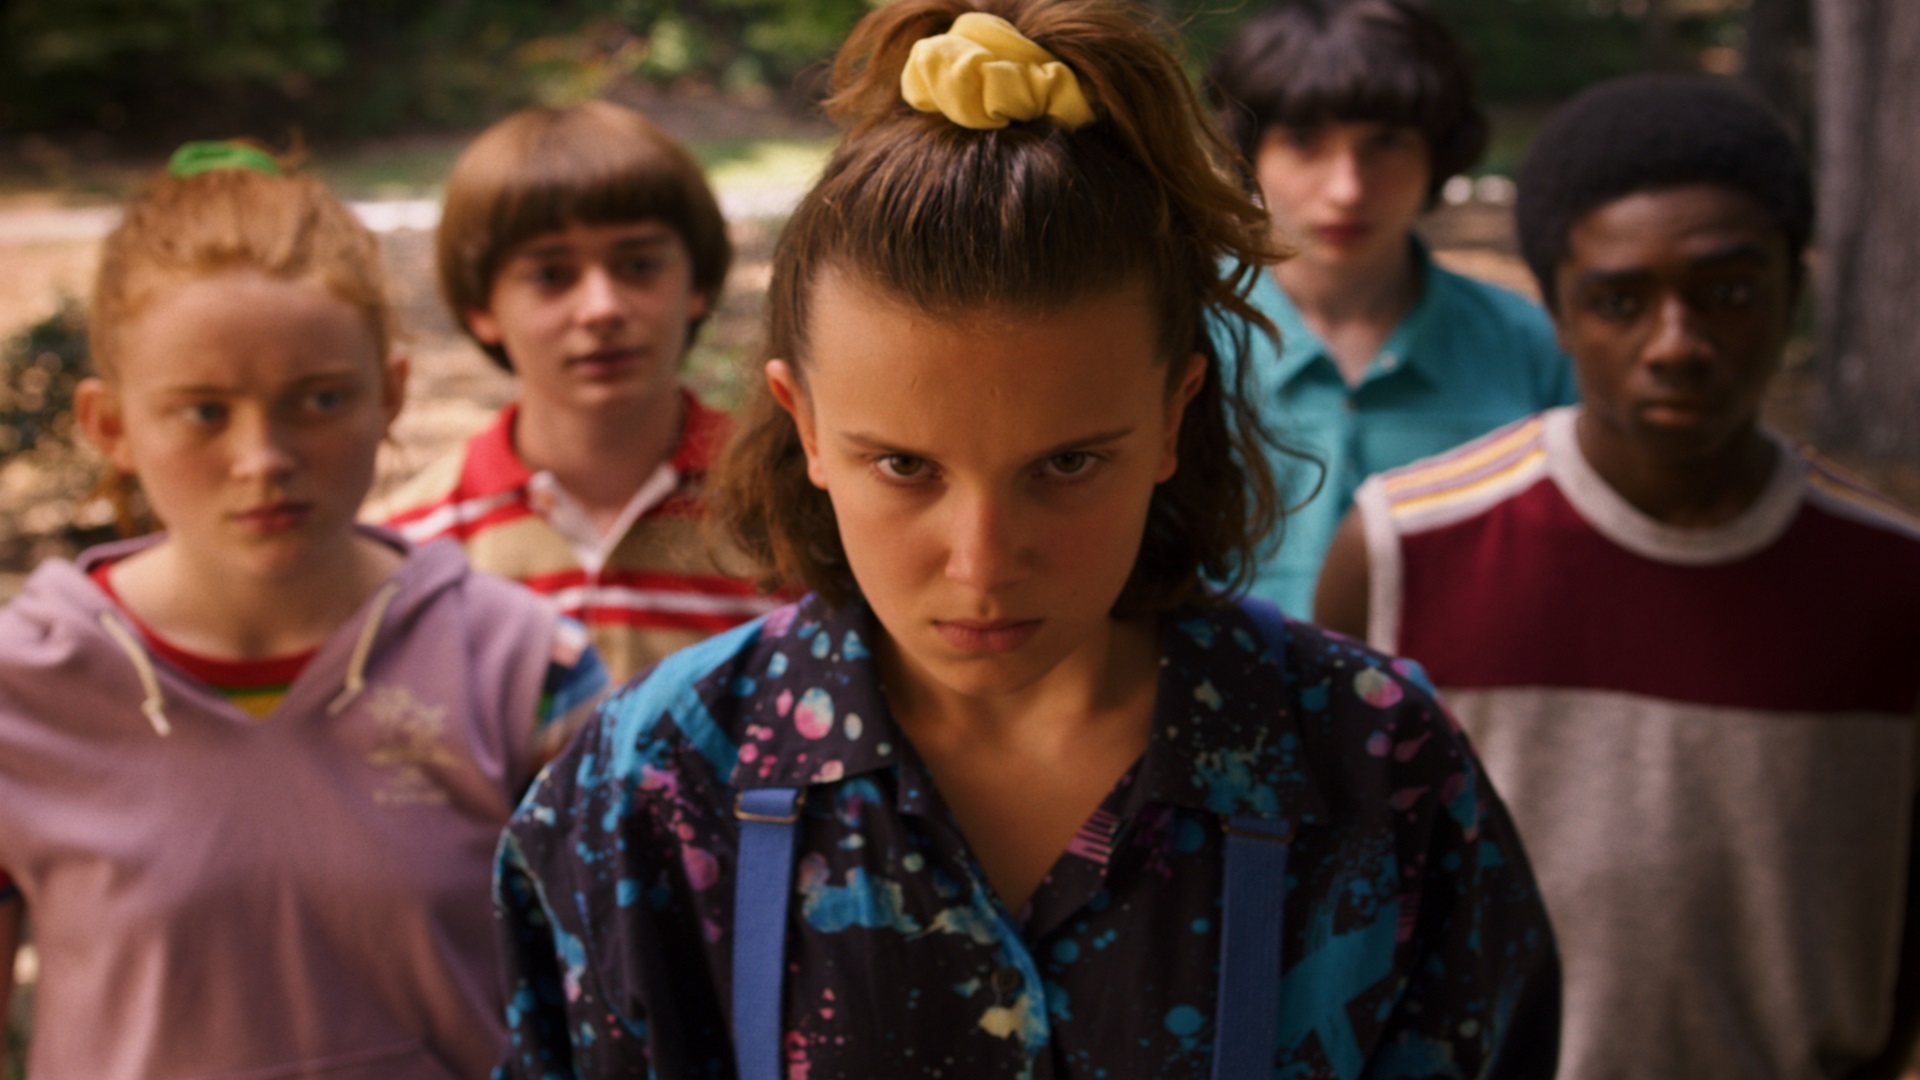 Netflix has renewed the worldwide hit series Stranger Things for a fourth season